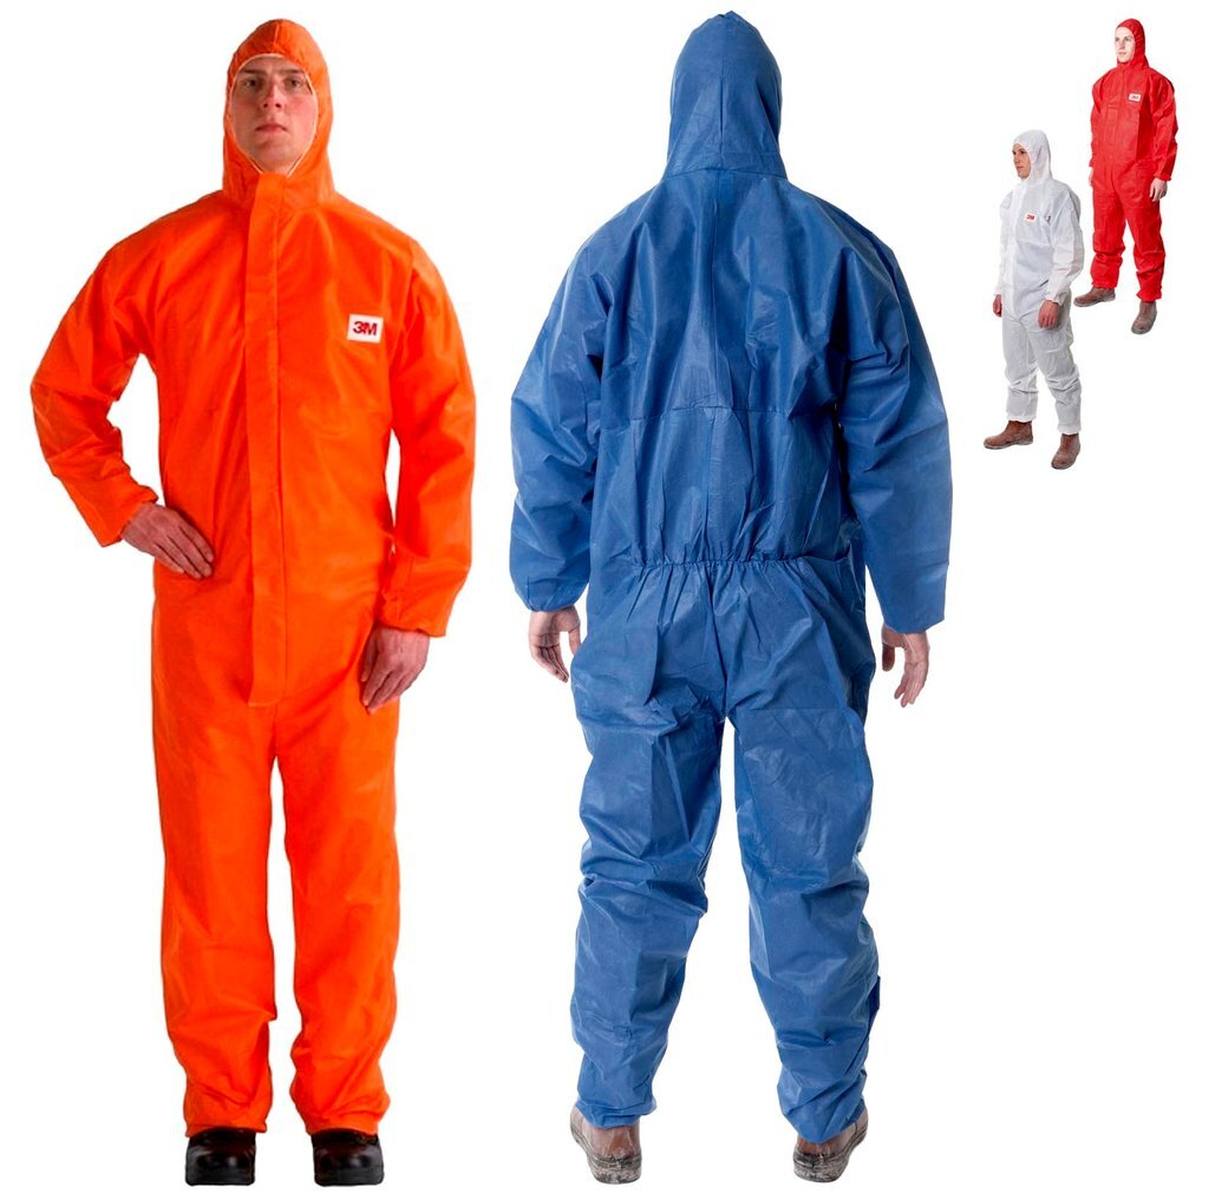 3M 4515O Protective suit, orange, TYPE 5/6, size S, material SMMS low-lint, elasticated cuffs